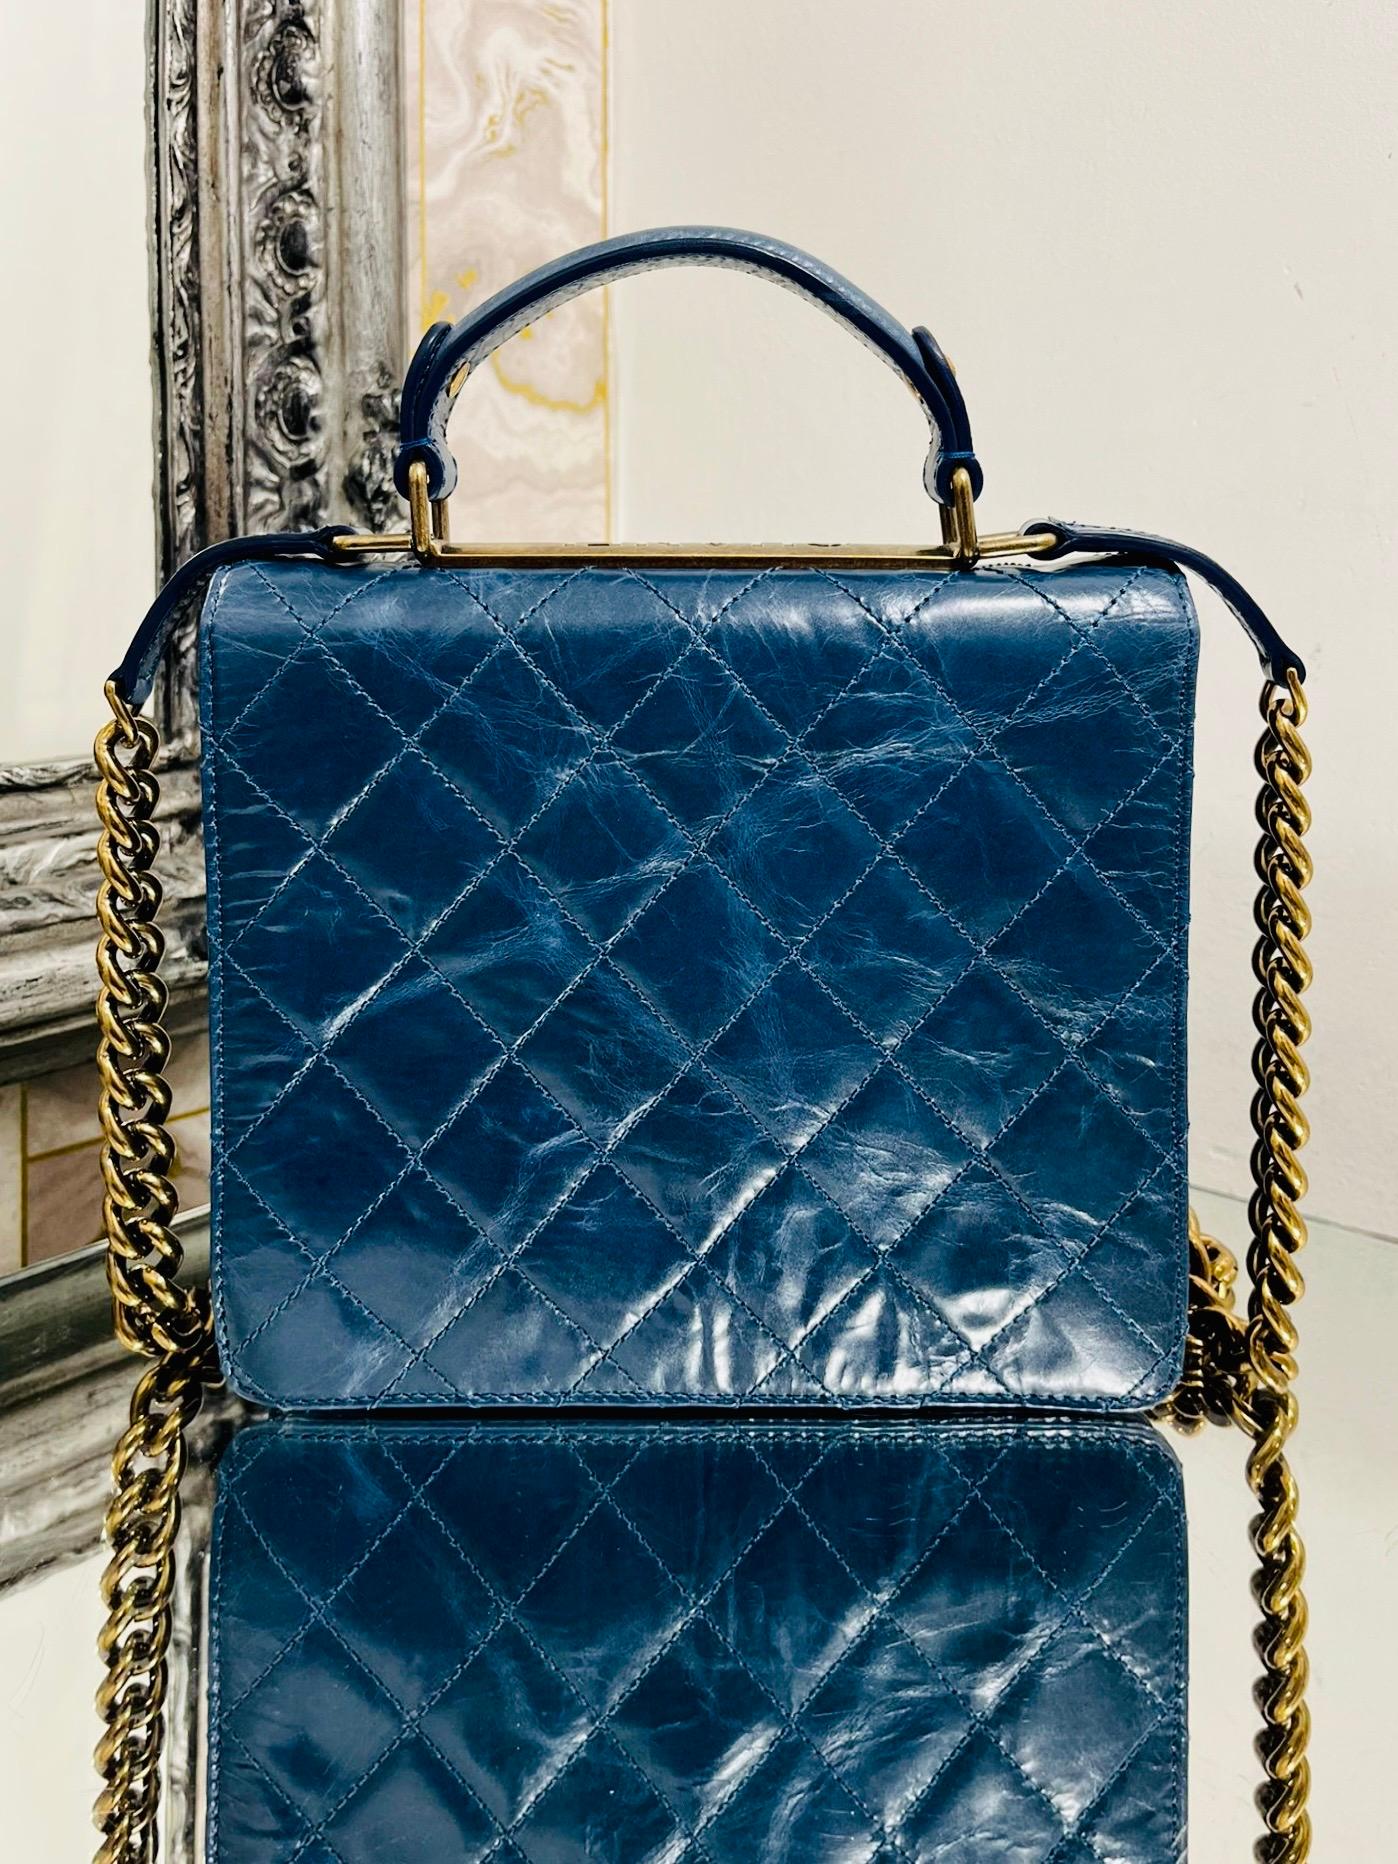 Chanel Trendy Aged Leather Bag 1